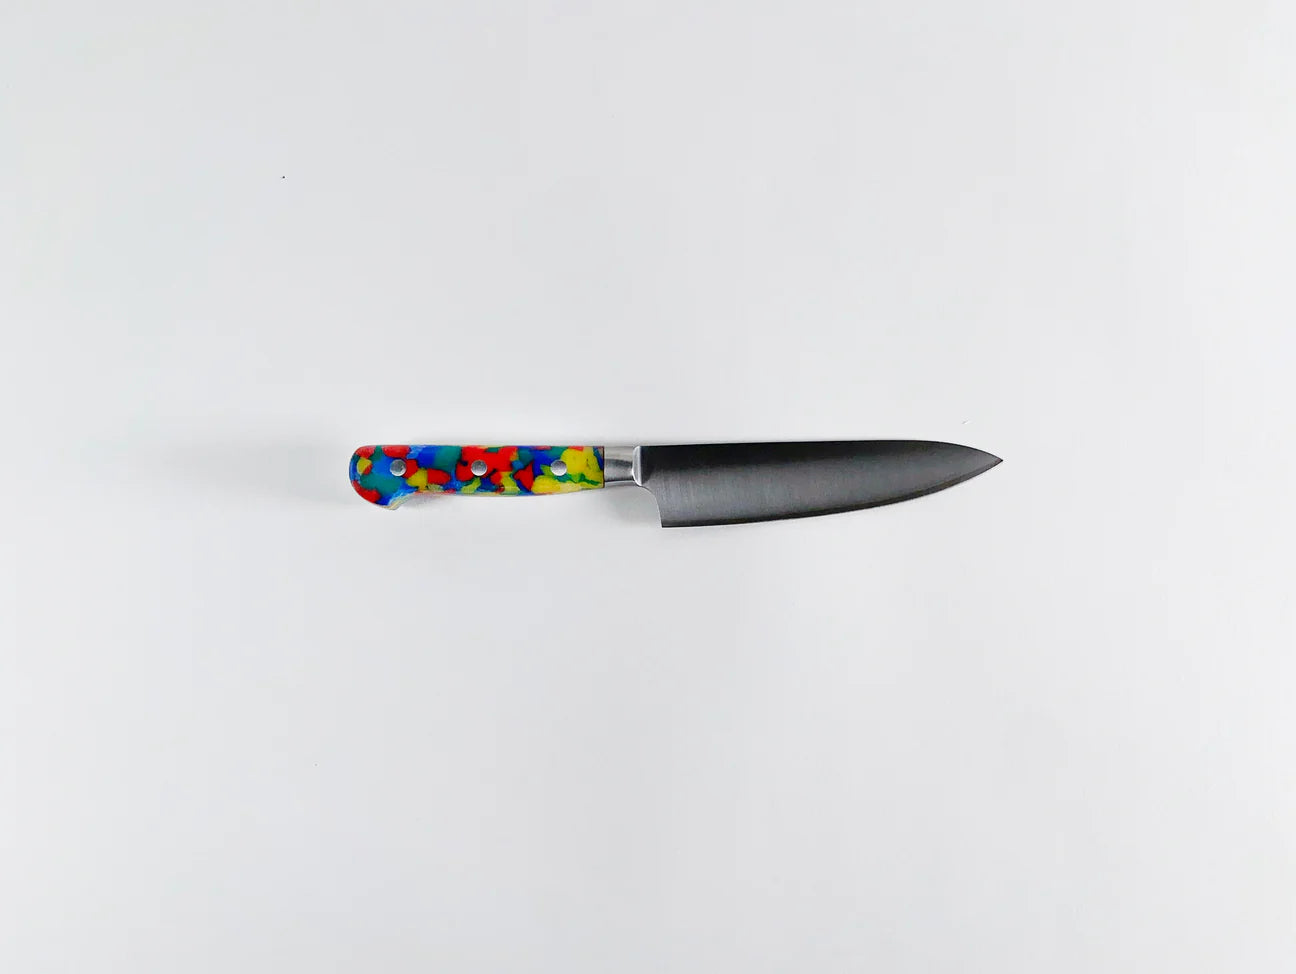 Utility knife with a multi colored handle